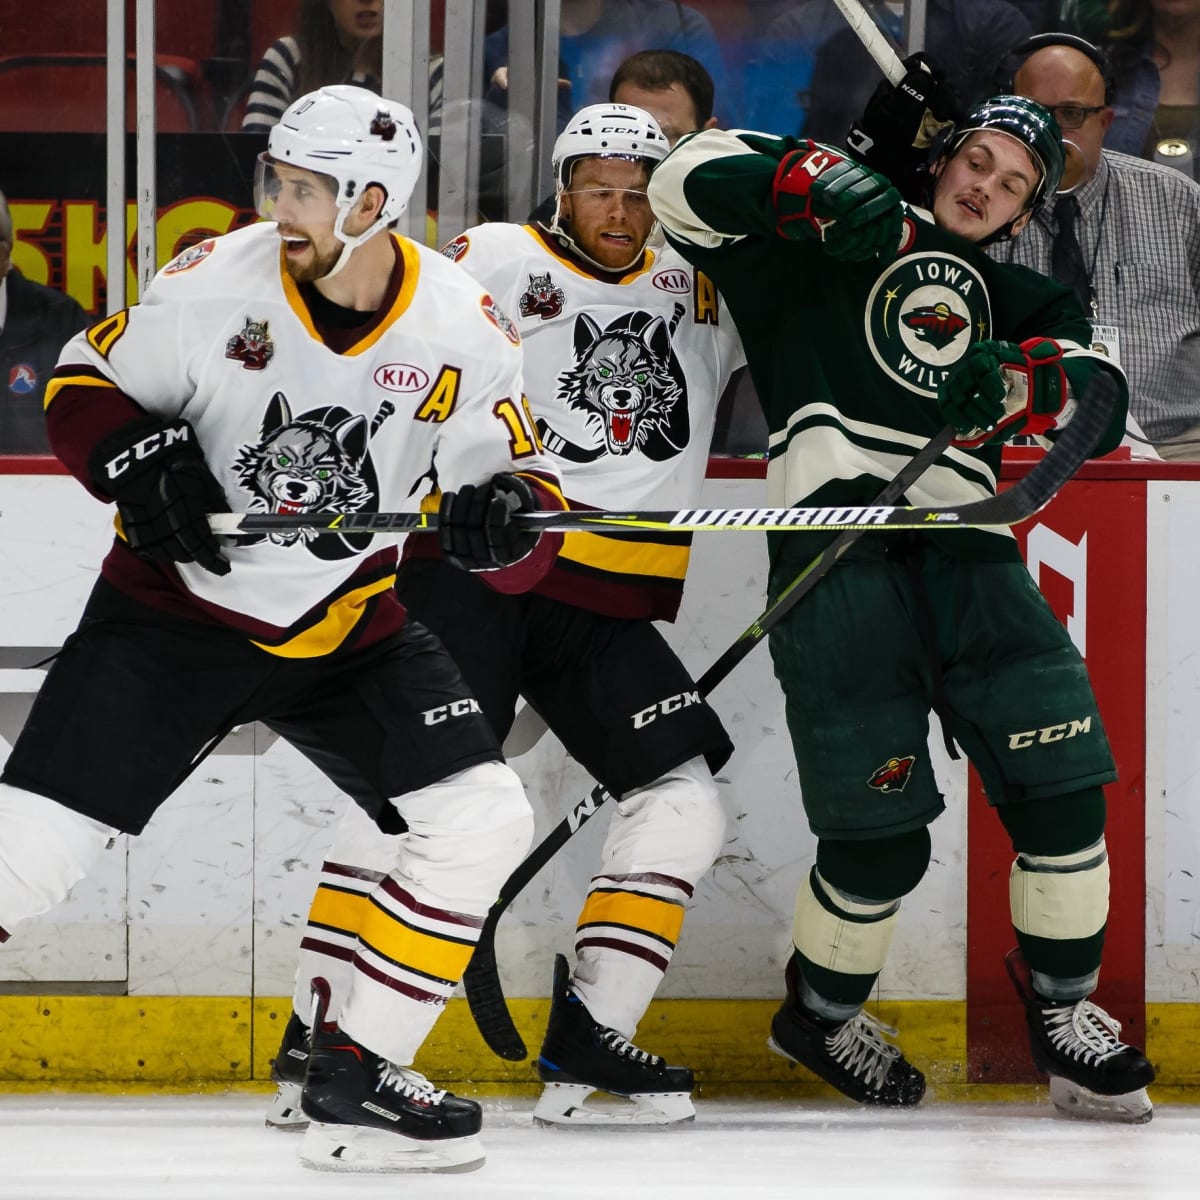 Gallery: April 2 vs. Milwaukee Admirals - Chicago Wolves